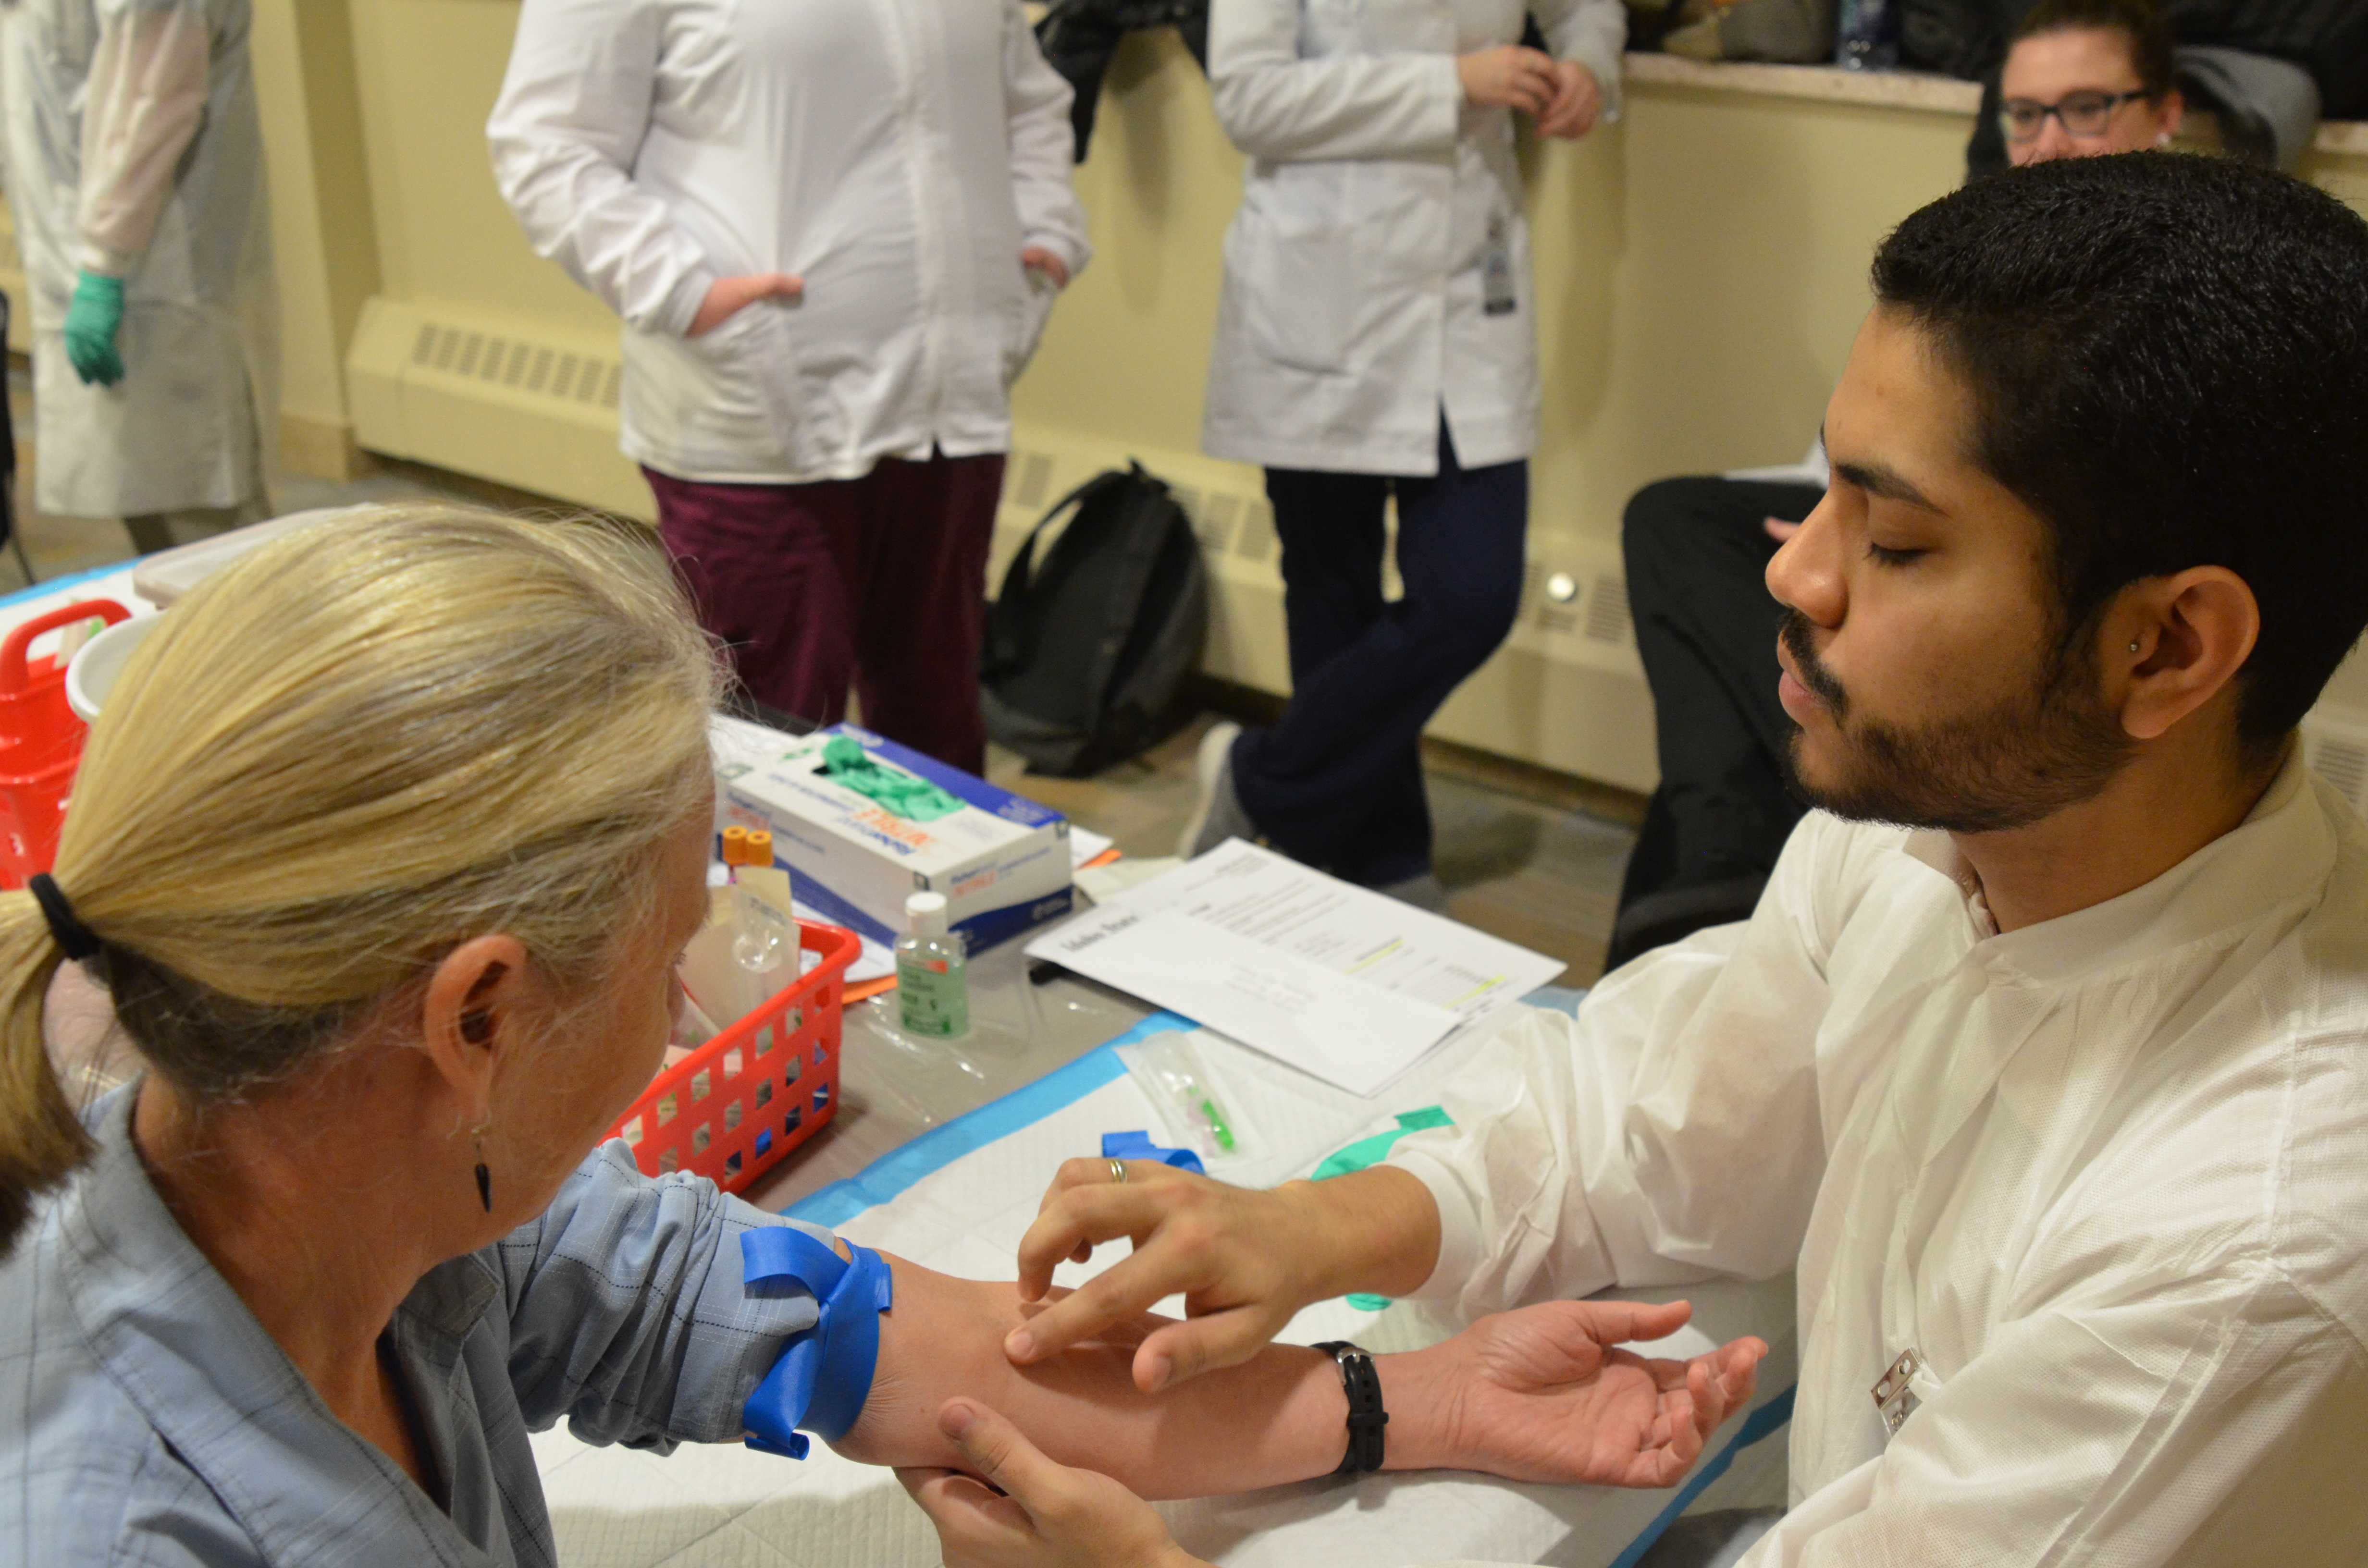 Student lab worker prepares to draw patient's blood at ISU Health Fair 2018